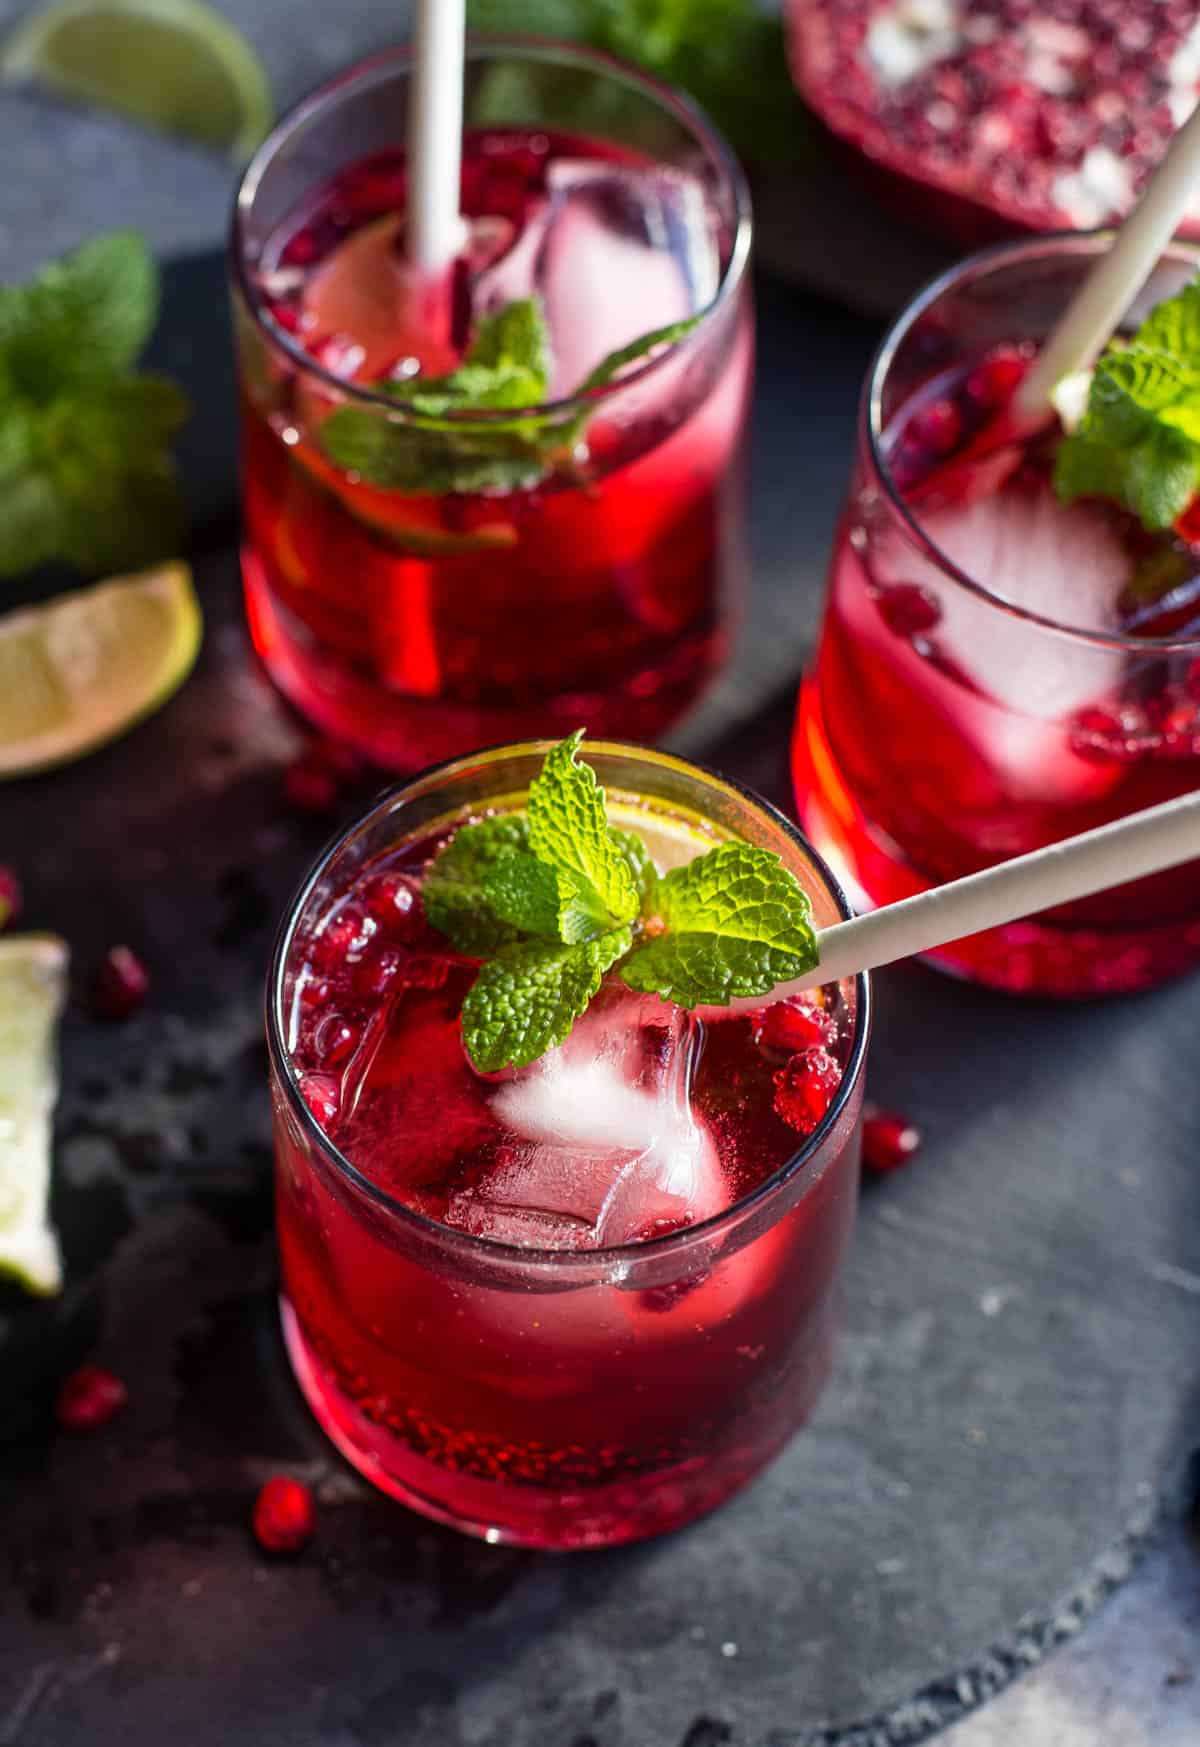 Three Ginger Beer cocktails made with pomegranate juice